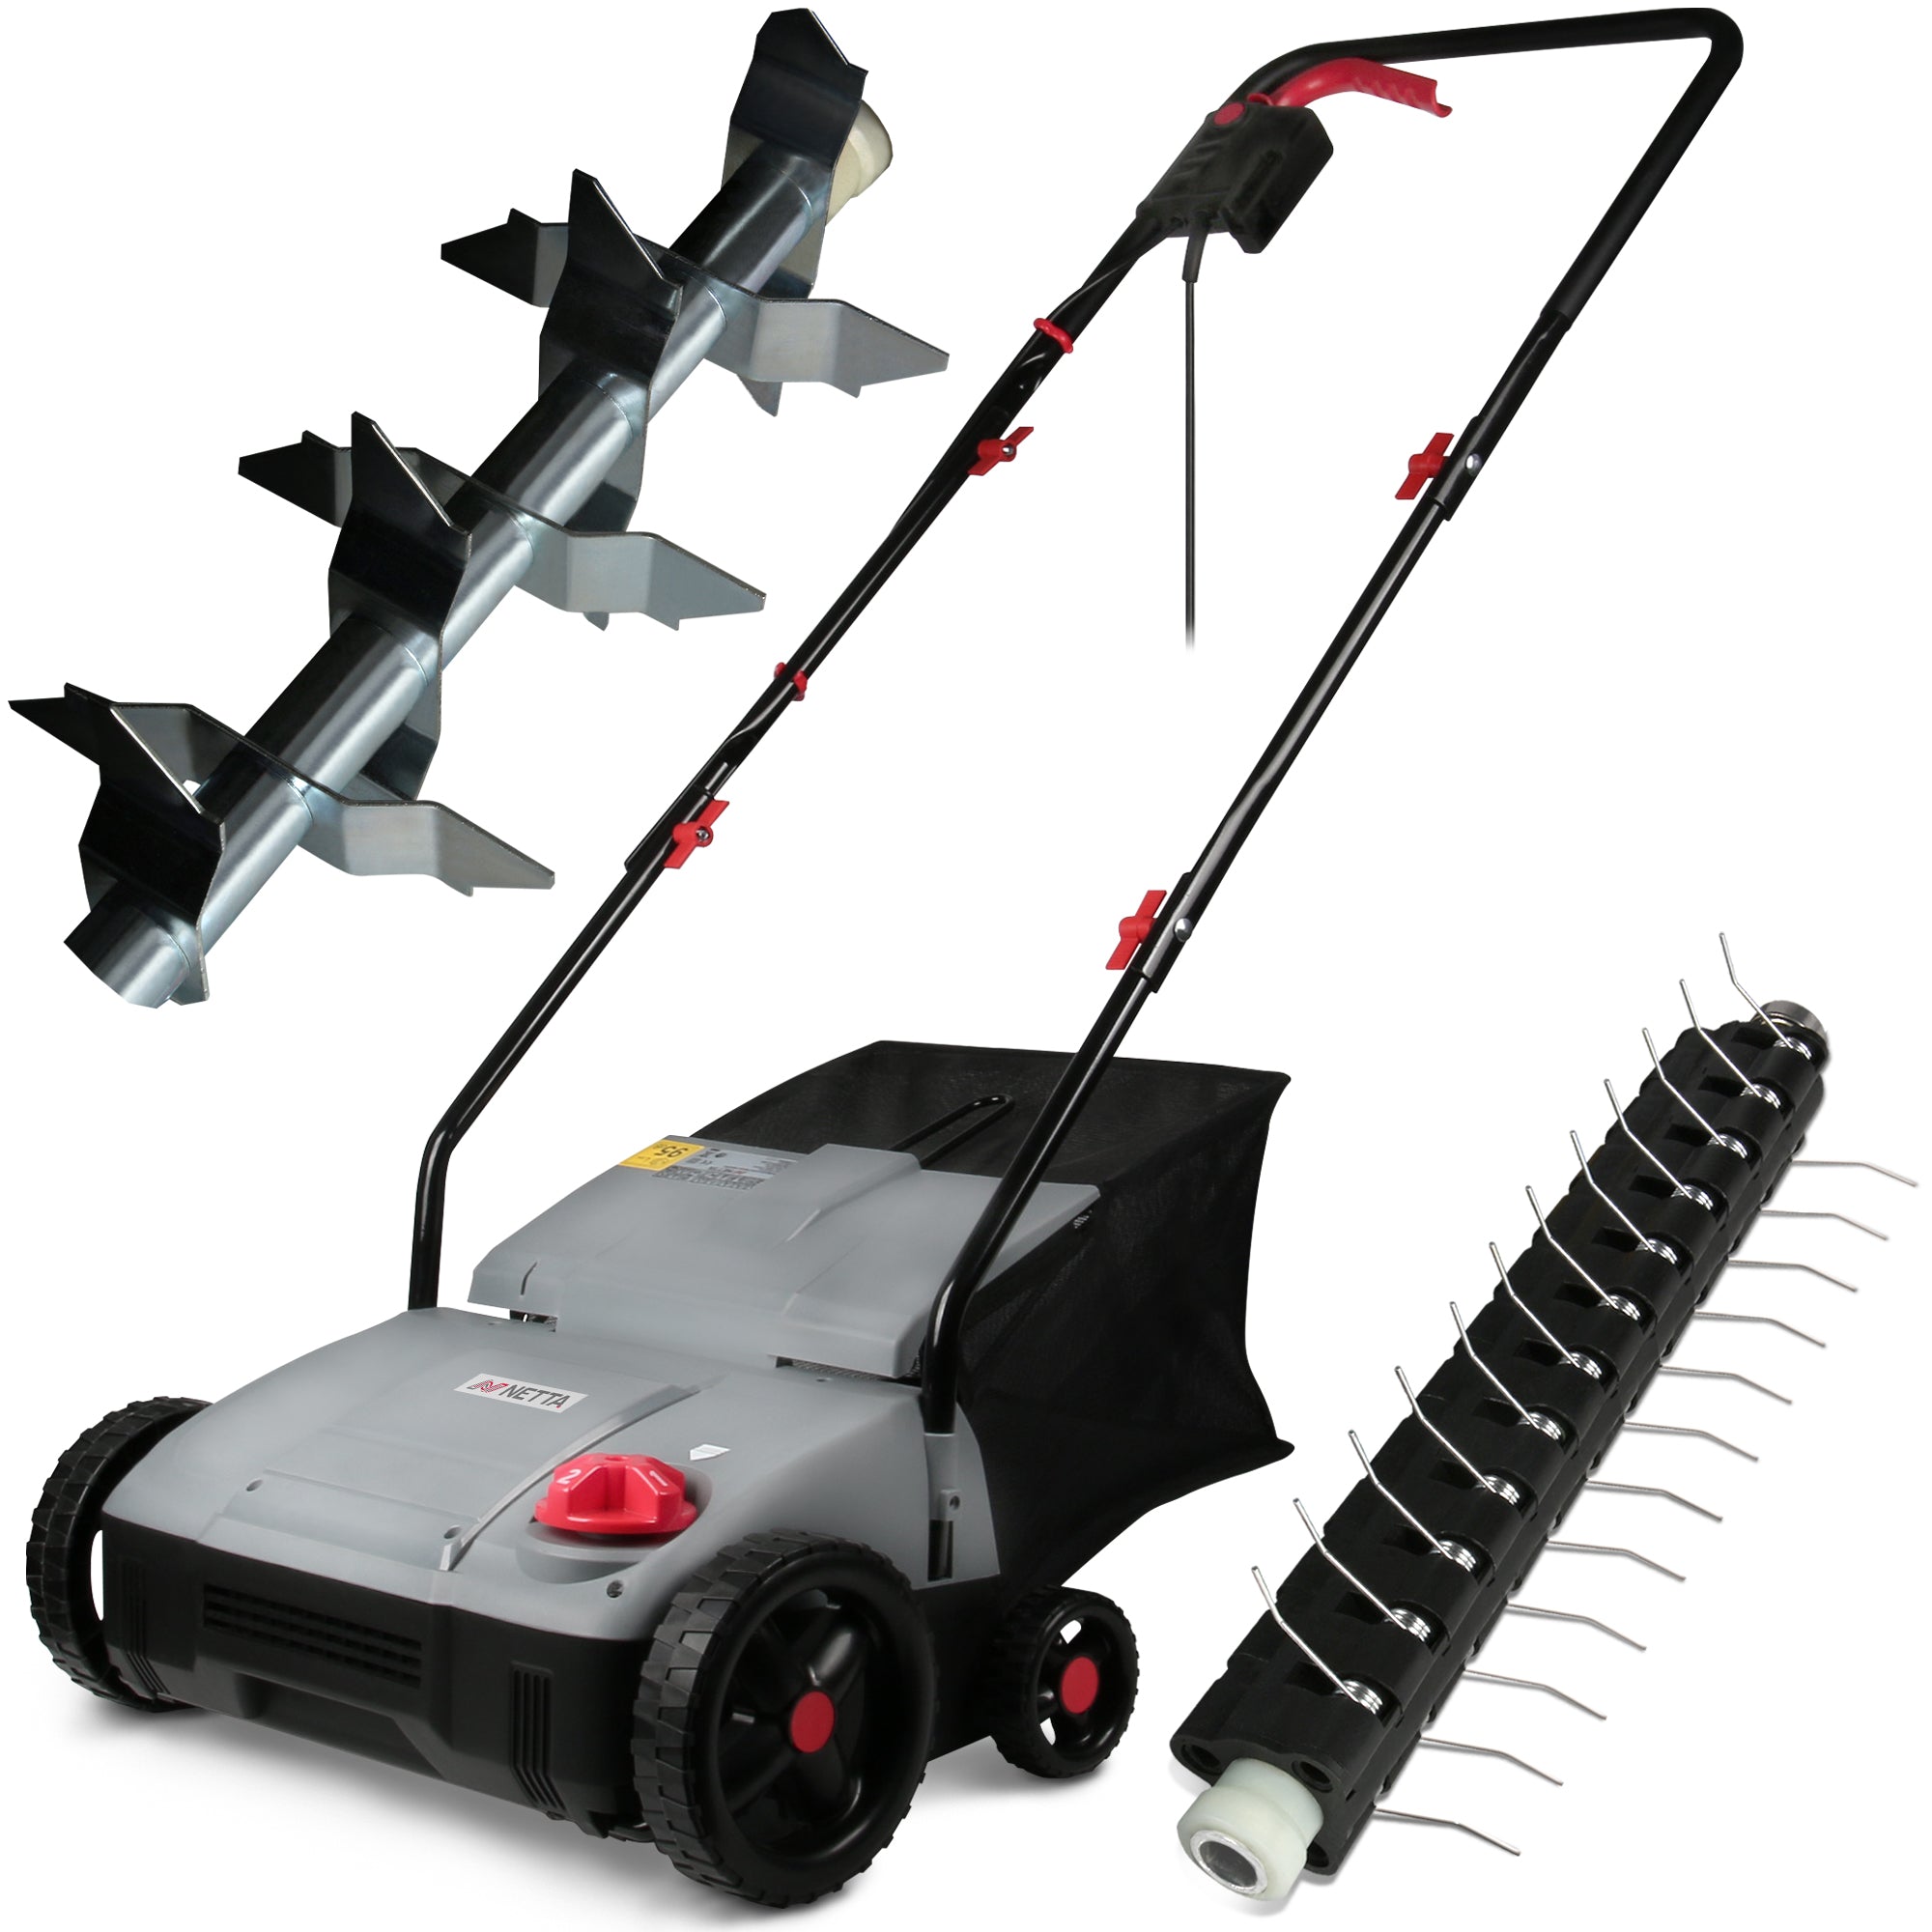 NETTA 2 in 1 Electric Lawn Scarifier and Aerator with 30L Collection Bag - 1500W